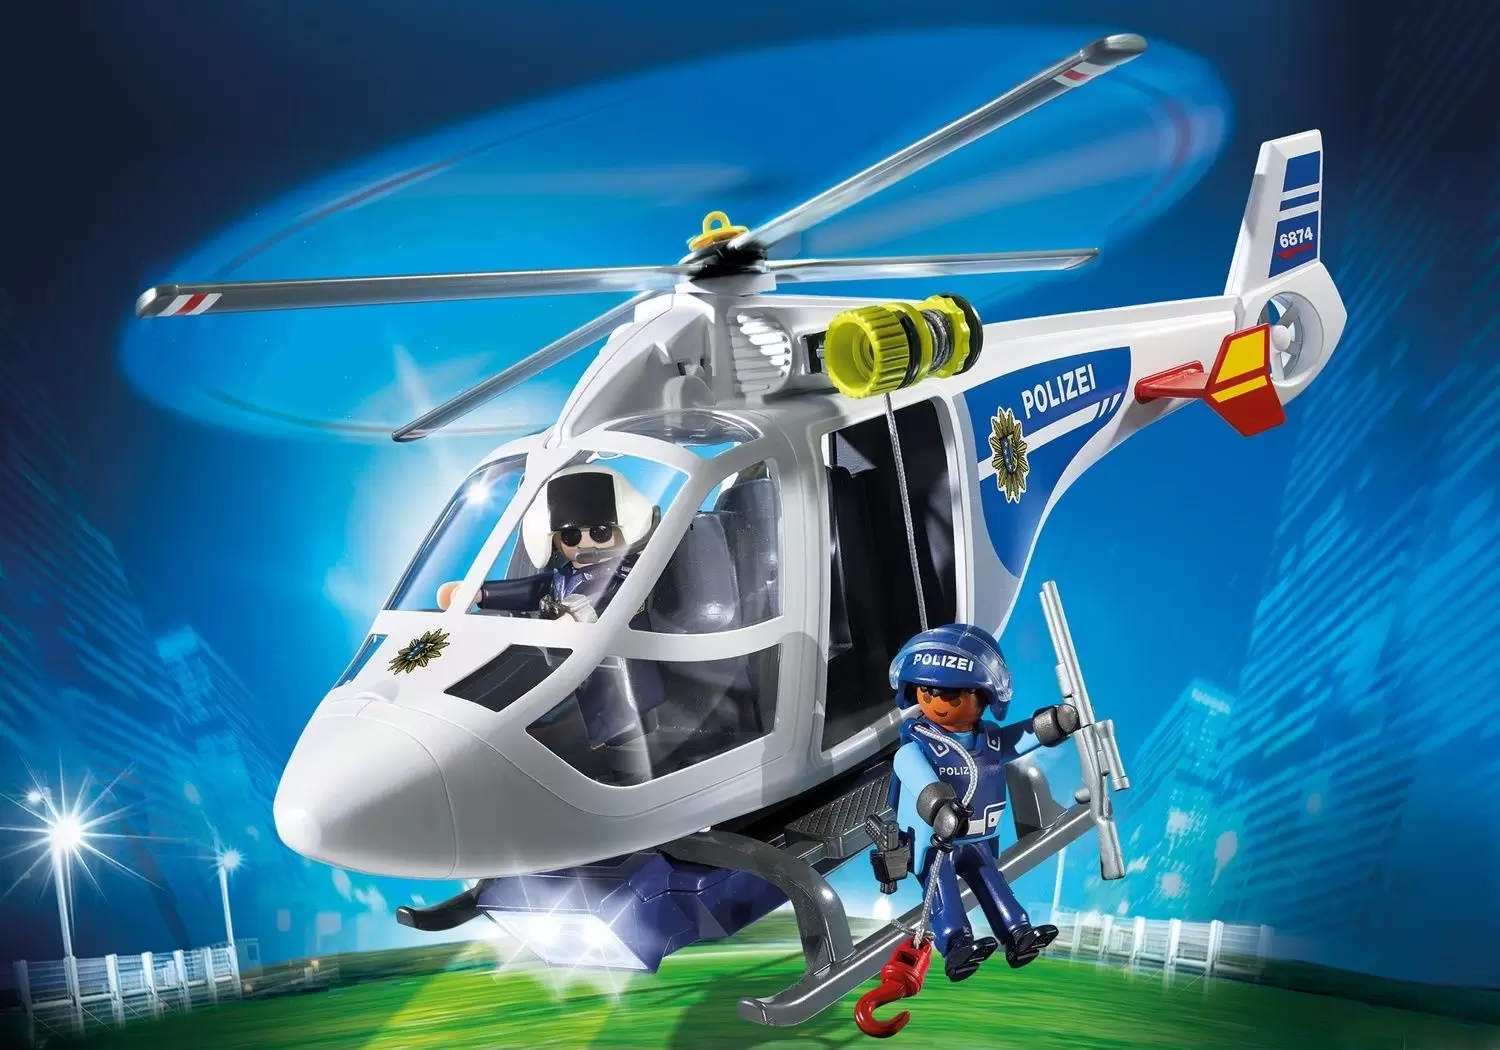 Police Playmobil - German Police Helicopter with LED Searchlight (Polizei)